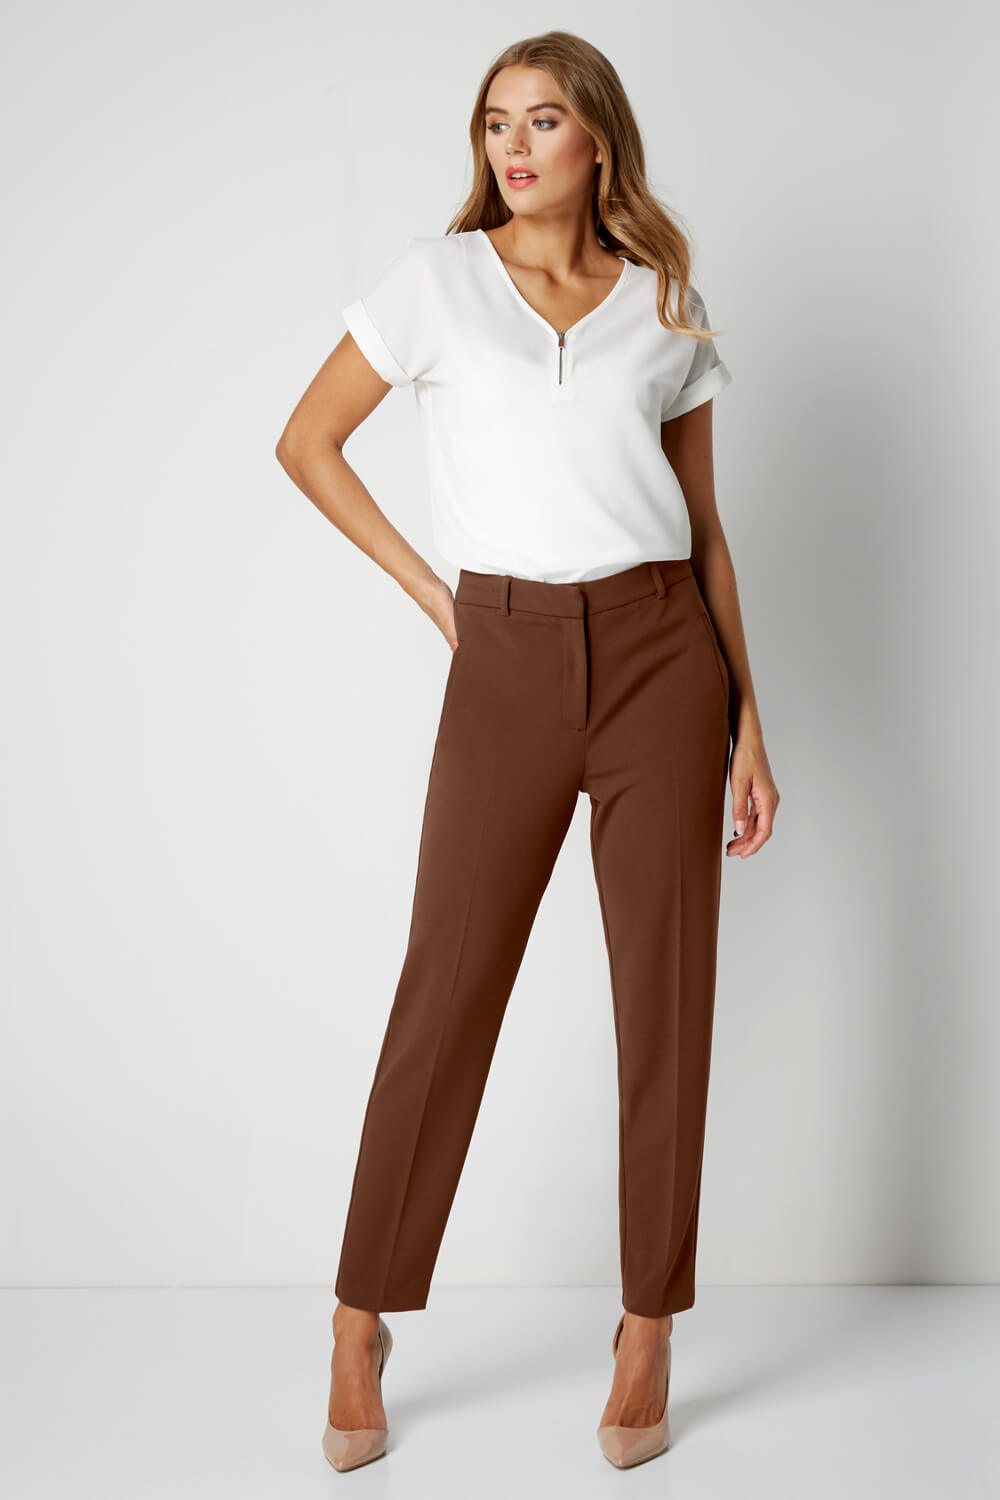 Real Bottom Regular Fit Women Brown Trousers  Buy Real Bottom Regular Fit  Women Brown Trousers Online at Best Prices in India  Flipkartcom